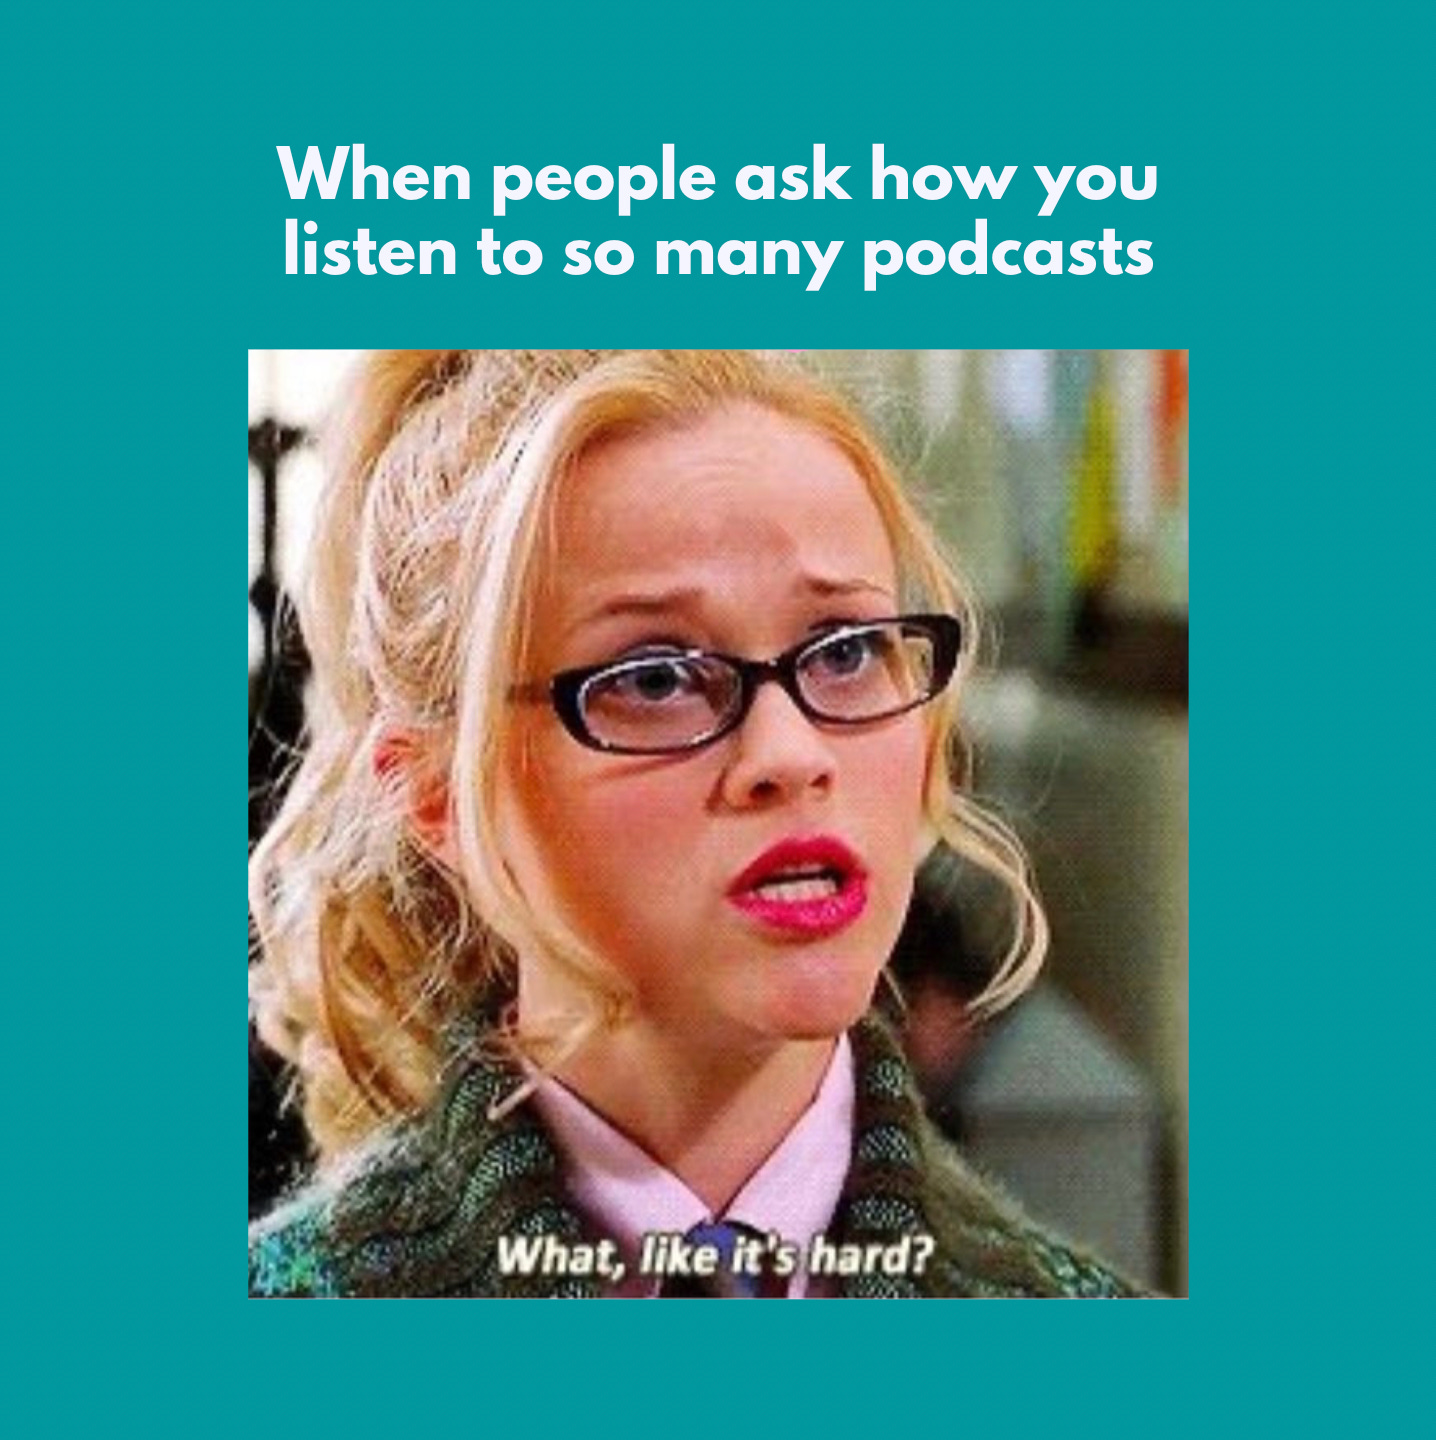 A meme for when people ask how you listen to so many podcasts. A picture of Reese Witherspoon in Legally Blonde saying what, like it's hard?